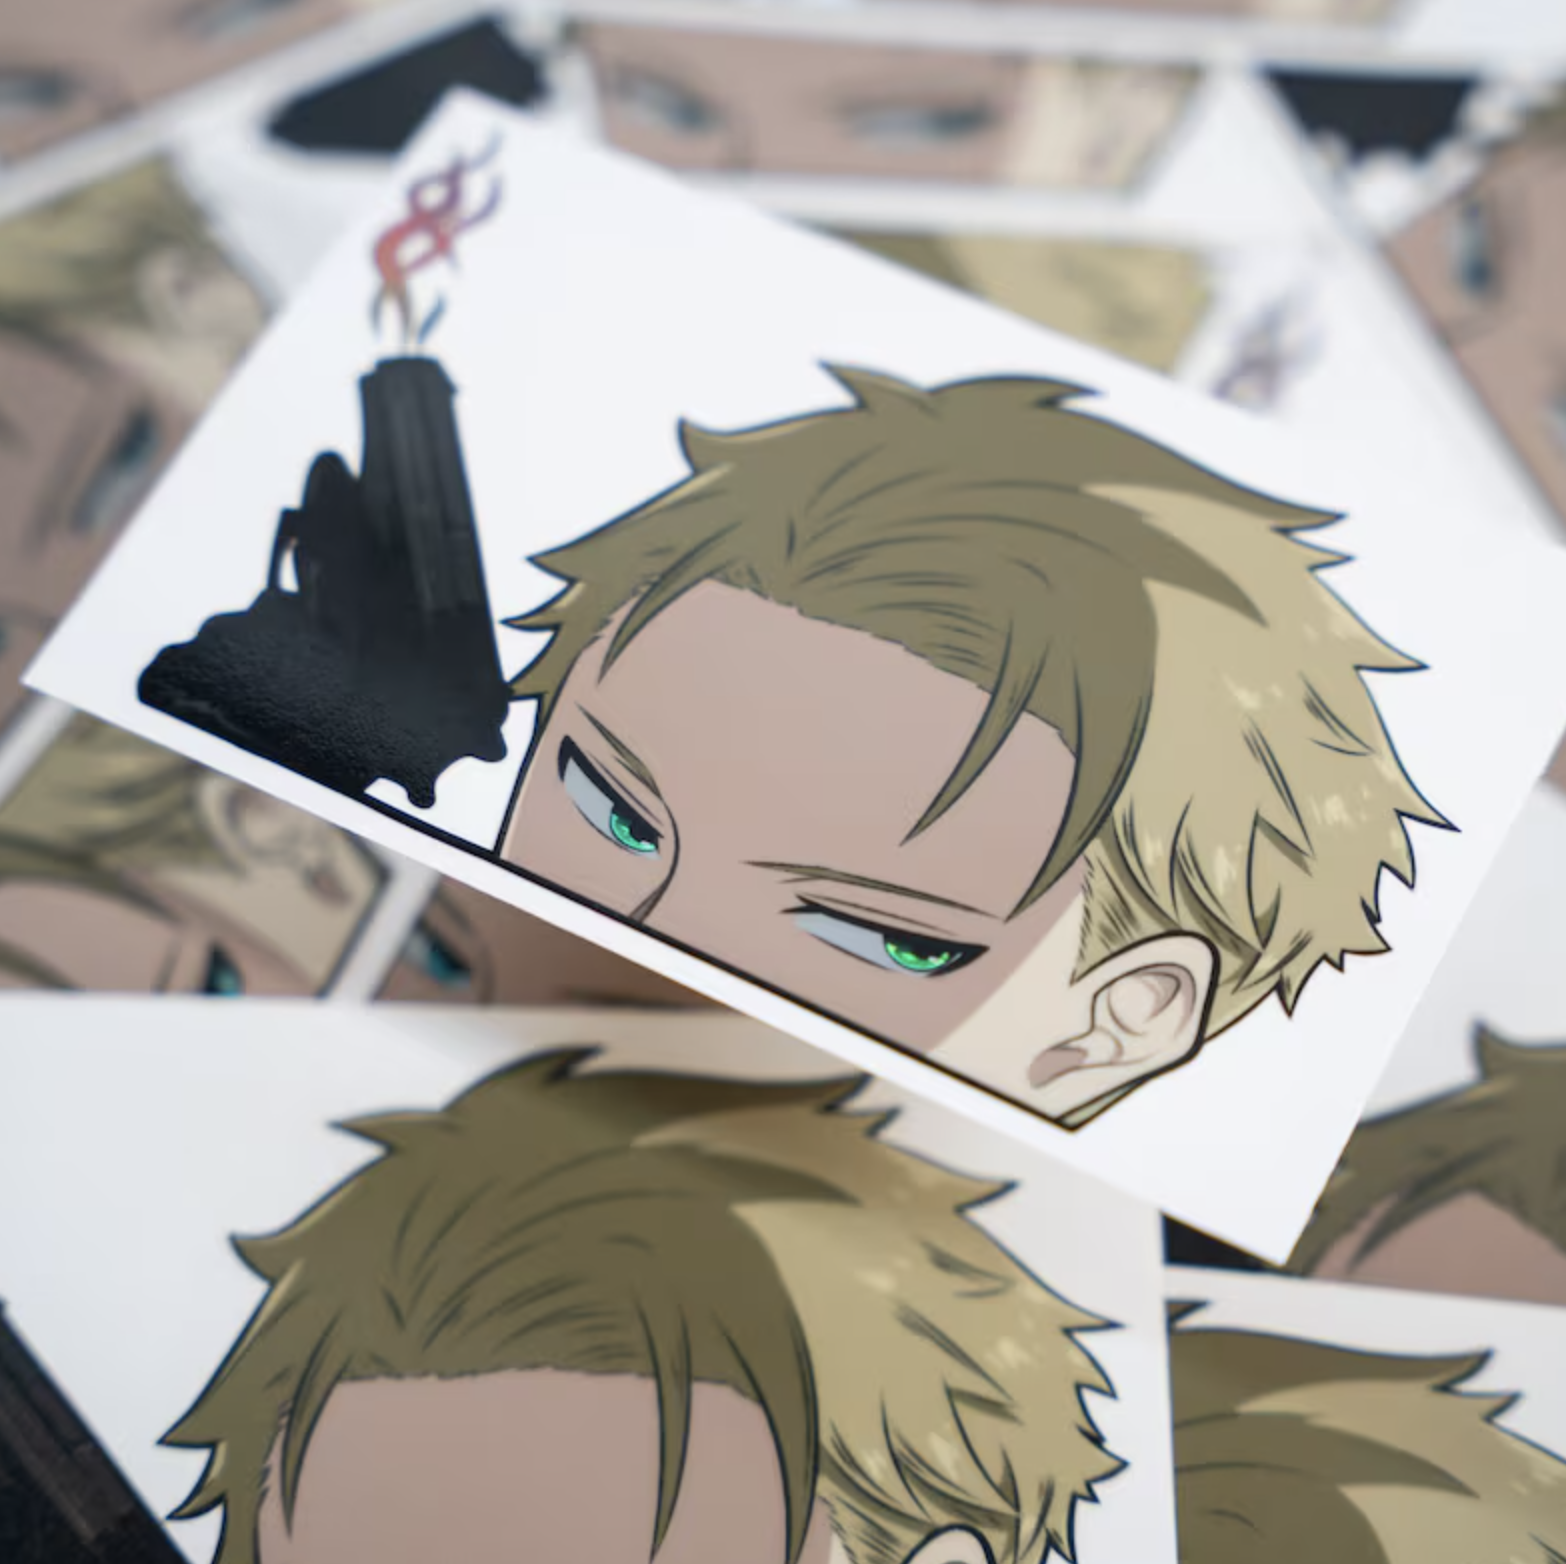 Assorted printed anime character stickers spread out, featuring close-up of a male character&#x27;s face holding a weapon